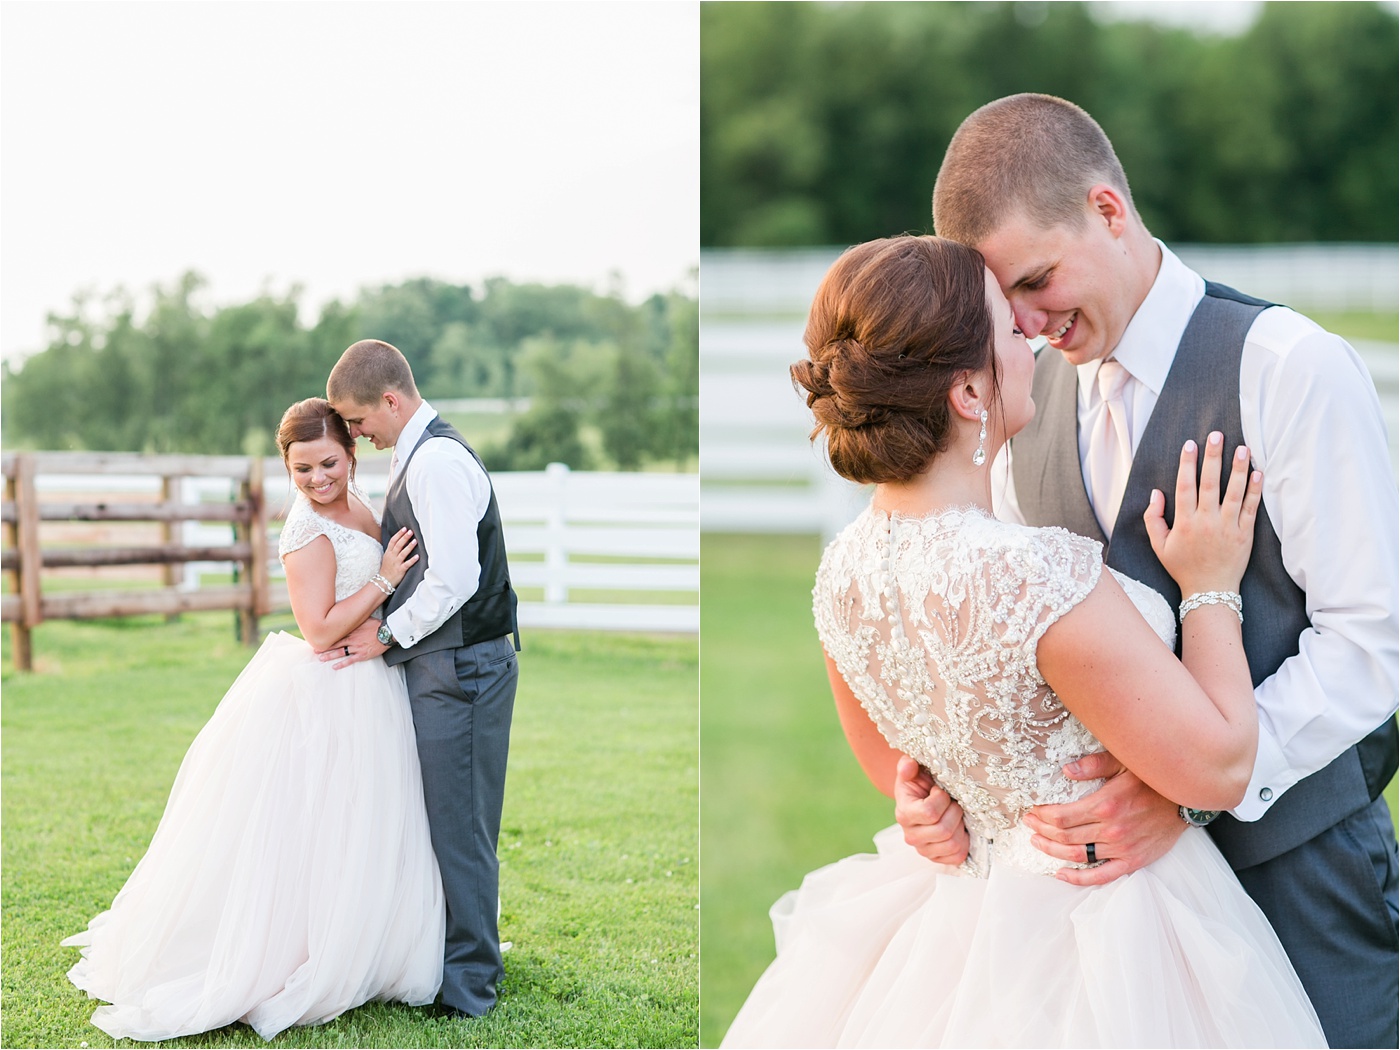 A Blush Outdoor wedding at Irongate Equestrian | KariMe Photography_0186